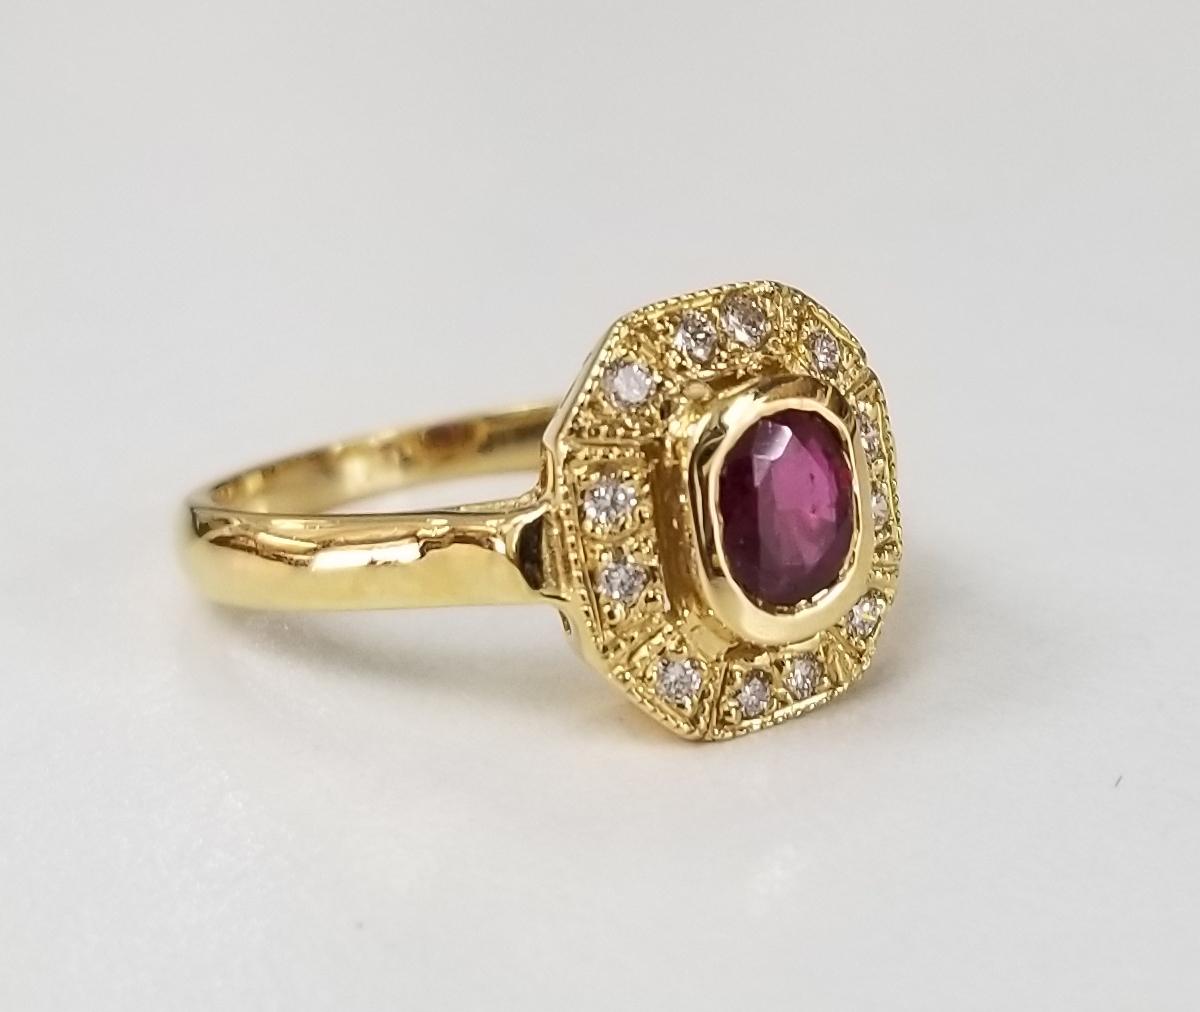 14k yellow gold ruby and diamond ring, containing 1 oval cut ruby of fine quality weighing .50pts. and 12 round full cut diamonds of very fine quality weighing .35pts. in an 